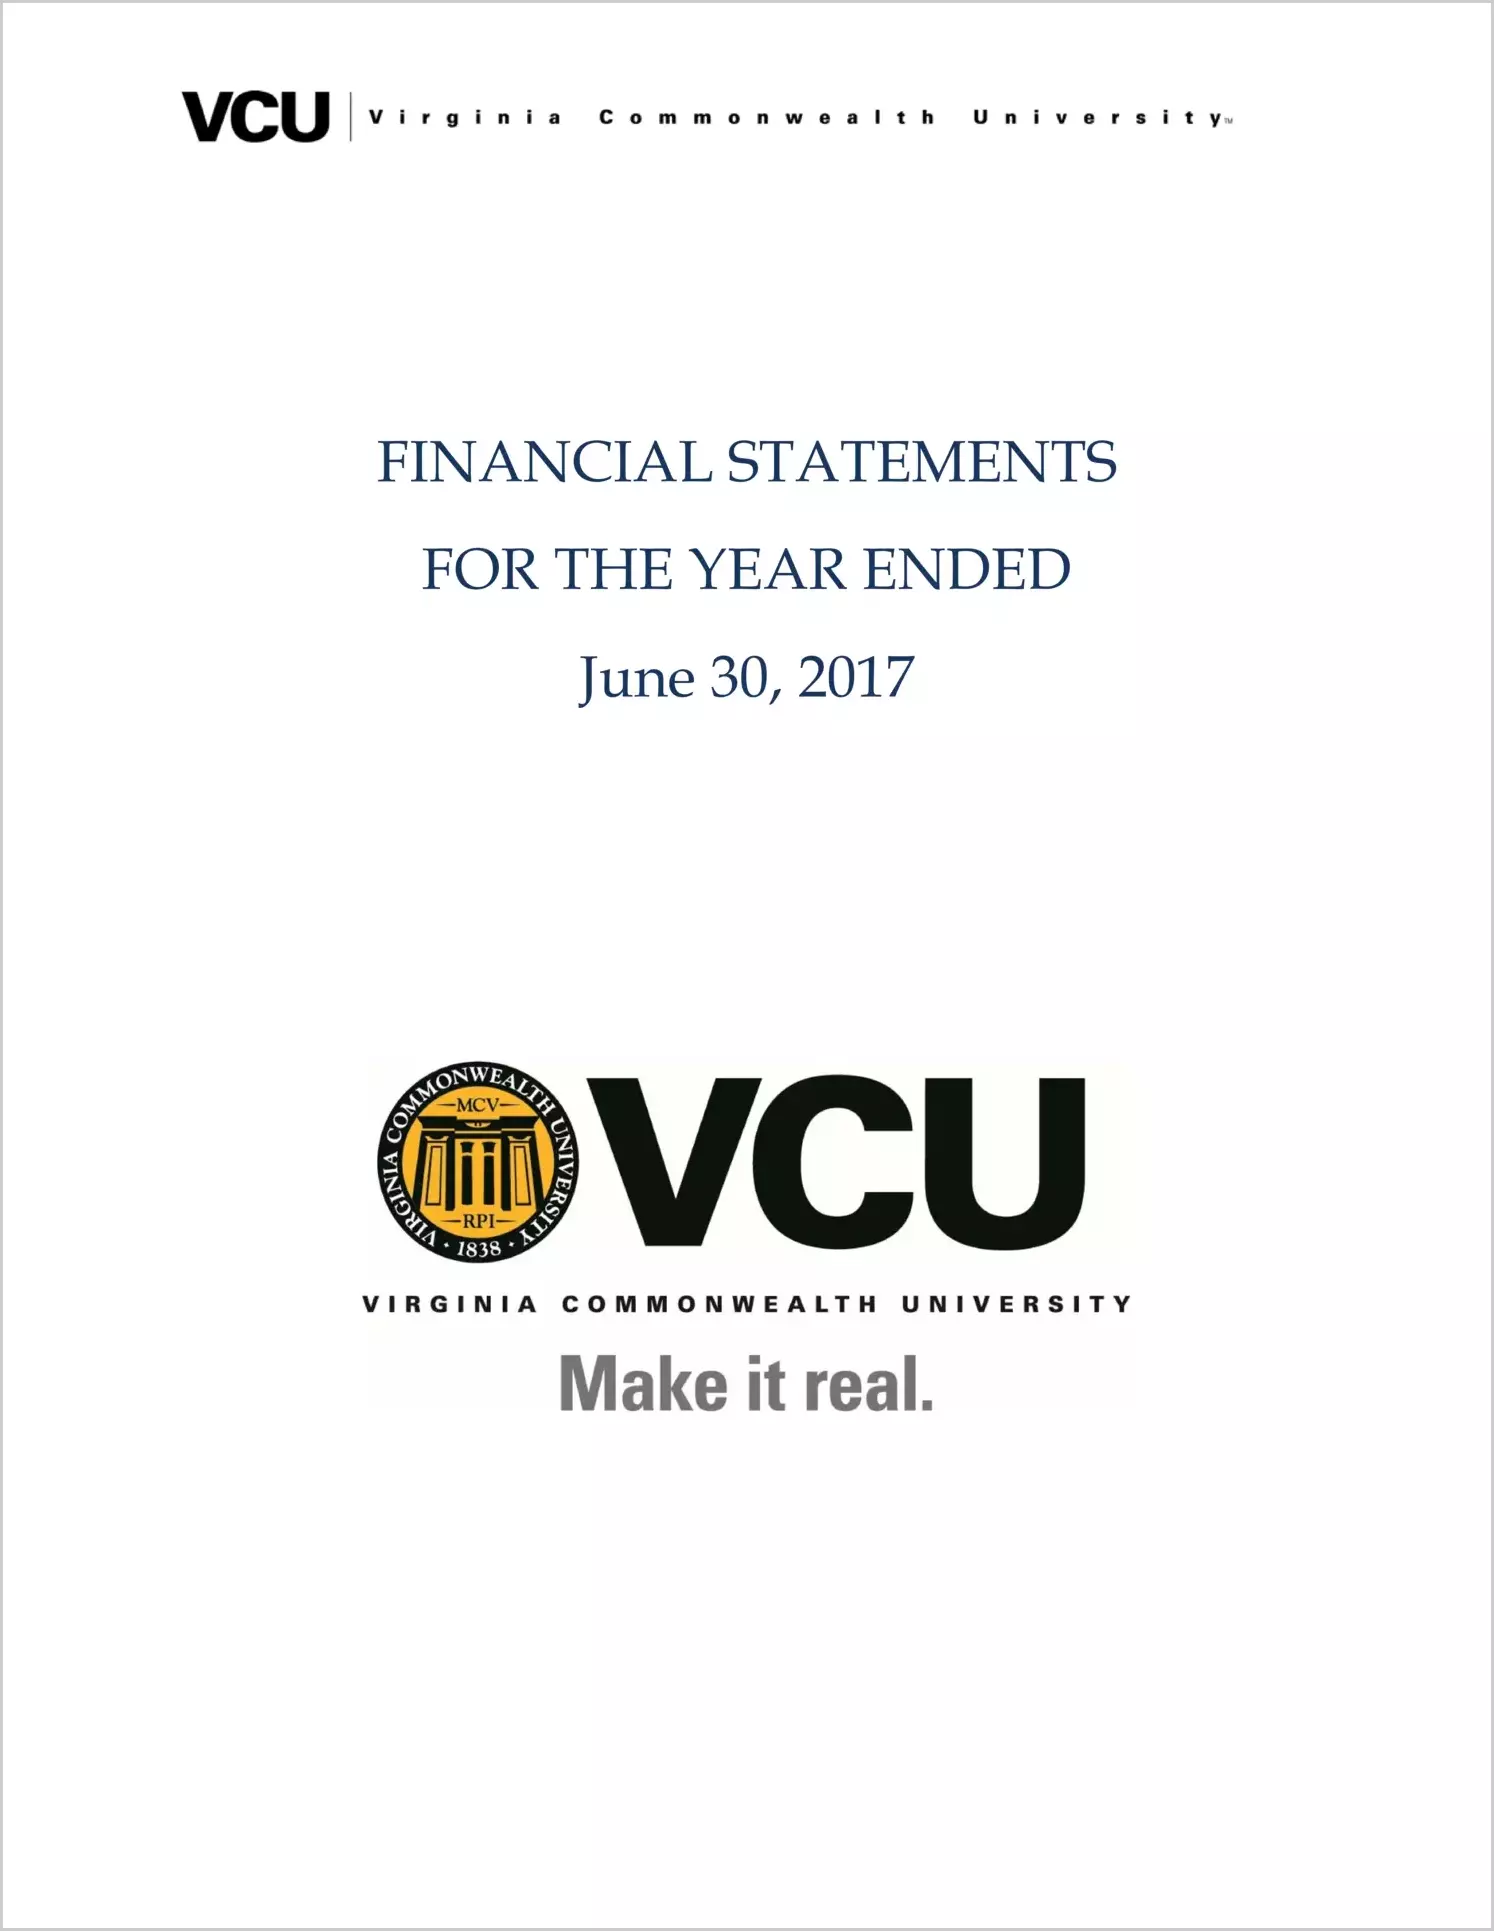 Virginia Commonwealth University Financial Statements for the year ended June 30, 2017